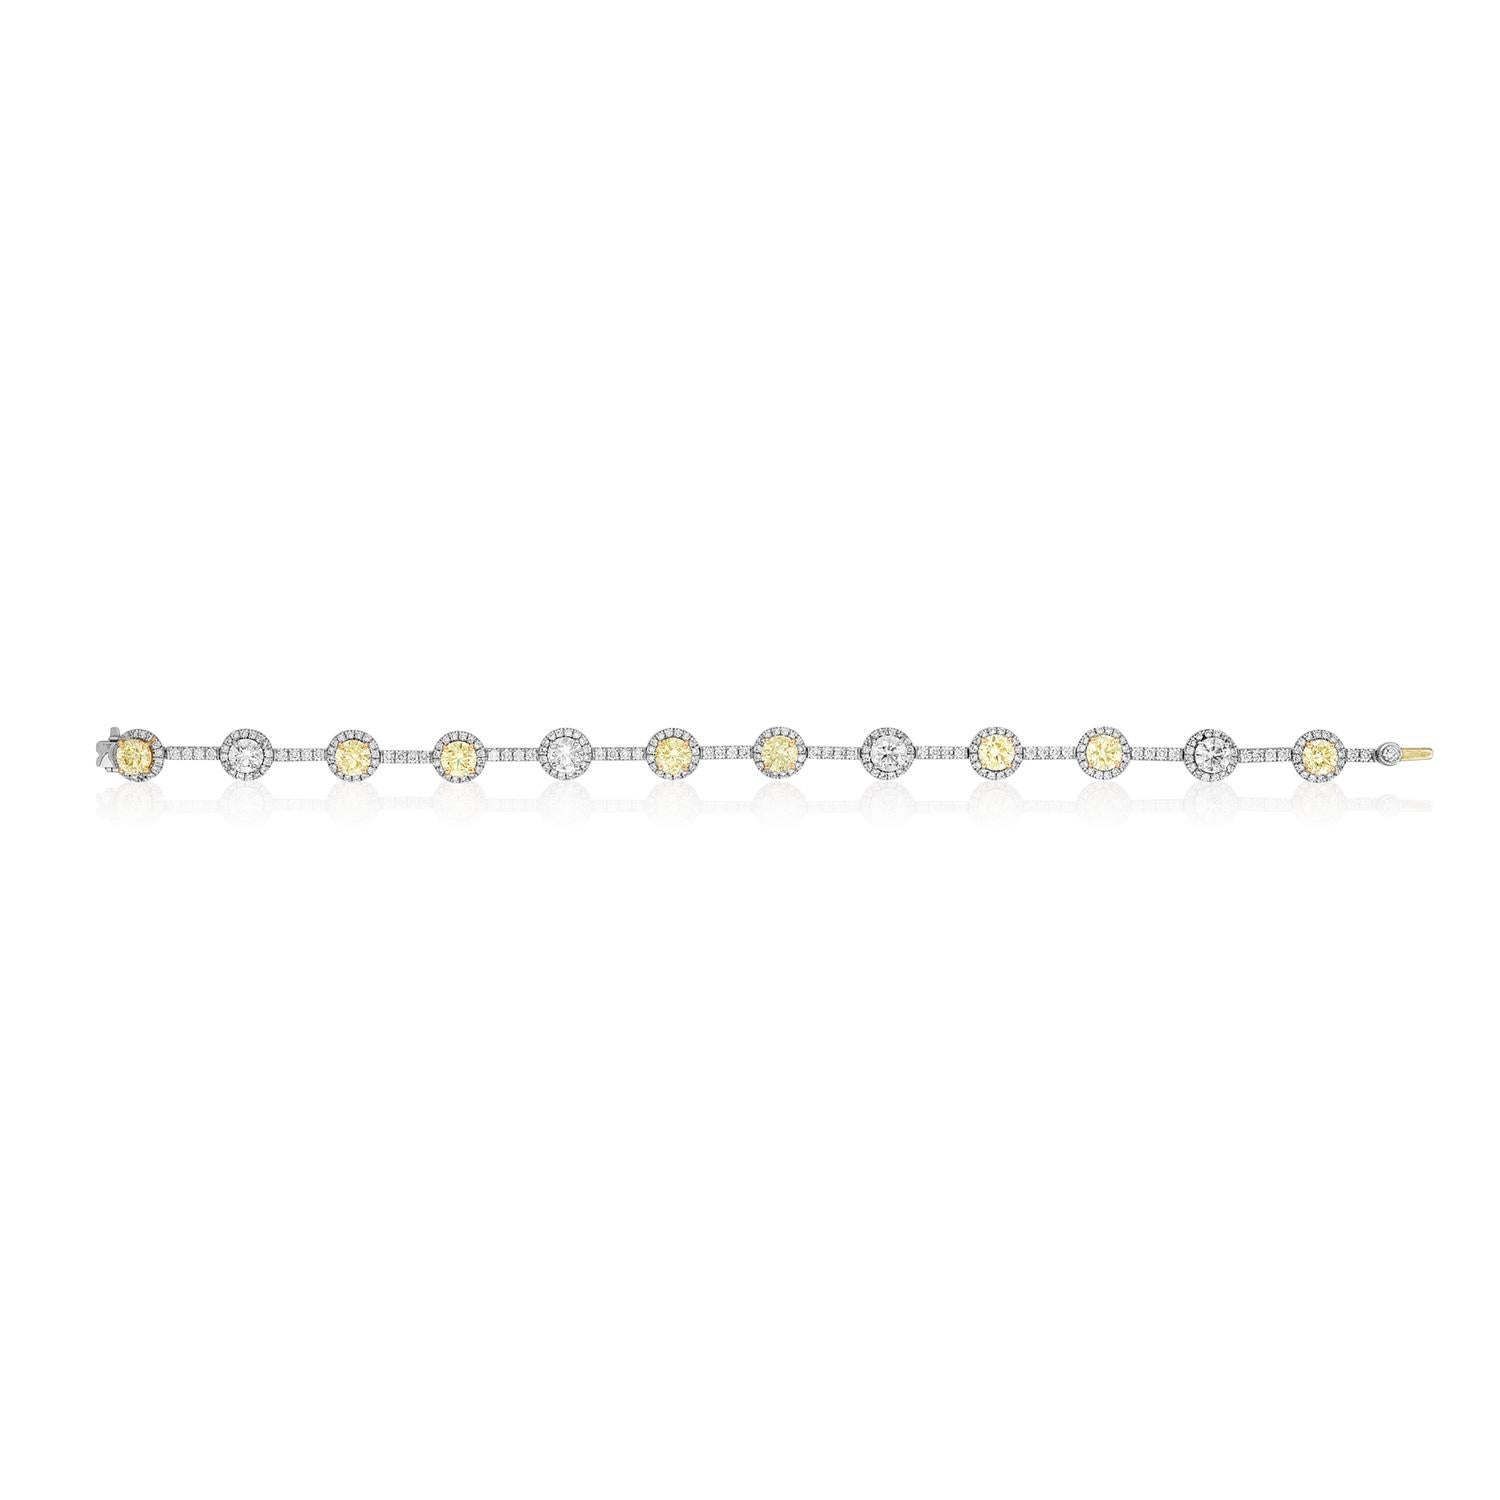 Yellow and White Diamond Bracelet

8 Round Yellow Diamonds and 4 Round White Diamonds weighing 5.96 Carats, surrounded and spaced with 238 Round White Diamonds weighing 1.71 Carats.

Set in Platinum and 18 Karat Yellow Gold

Measures 7 inches.